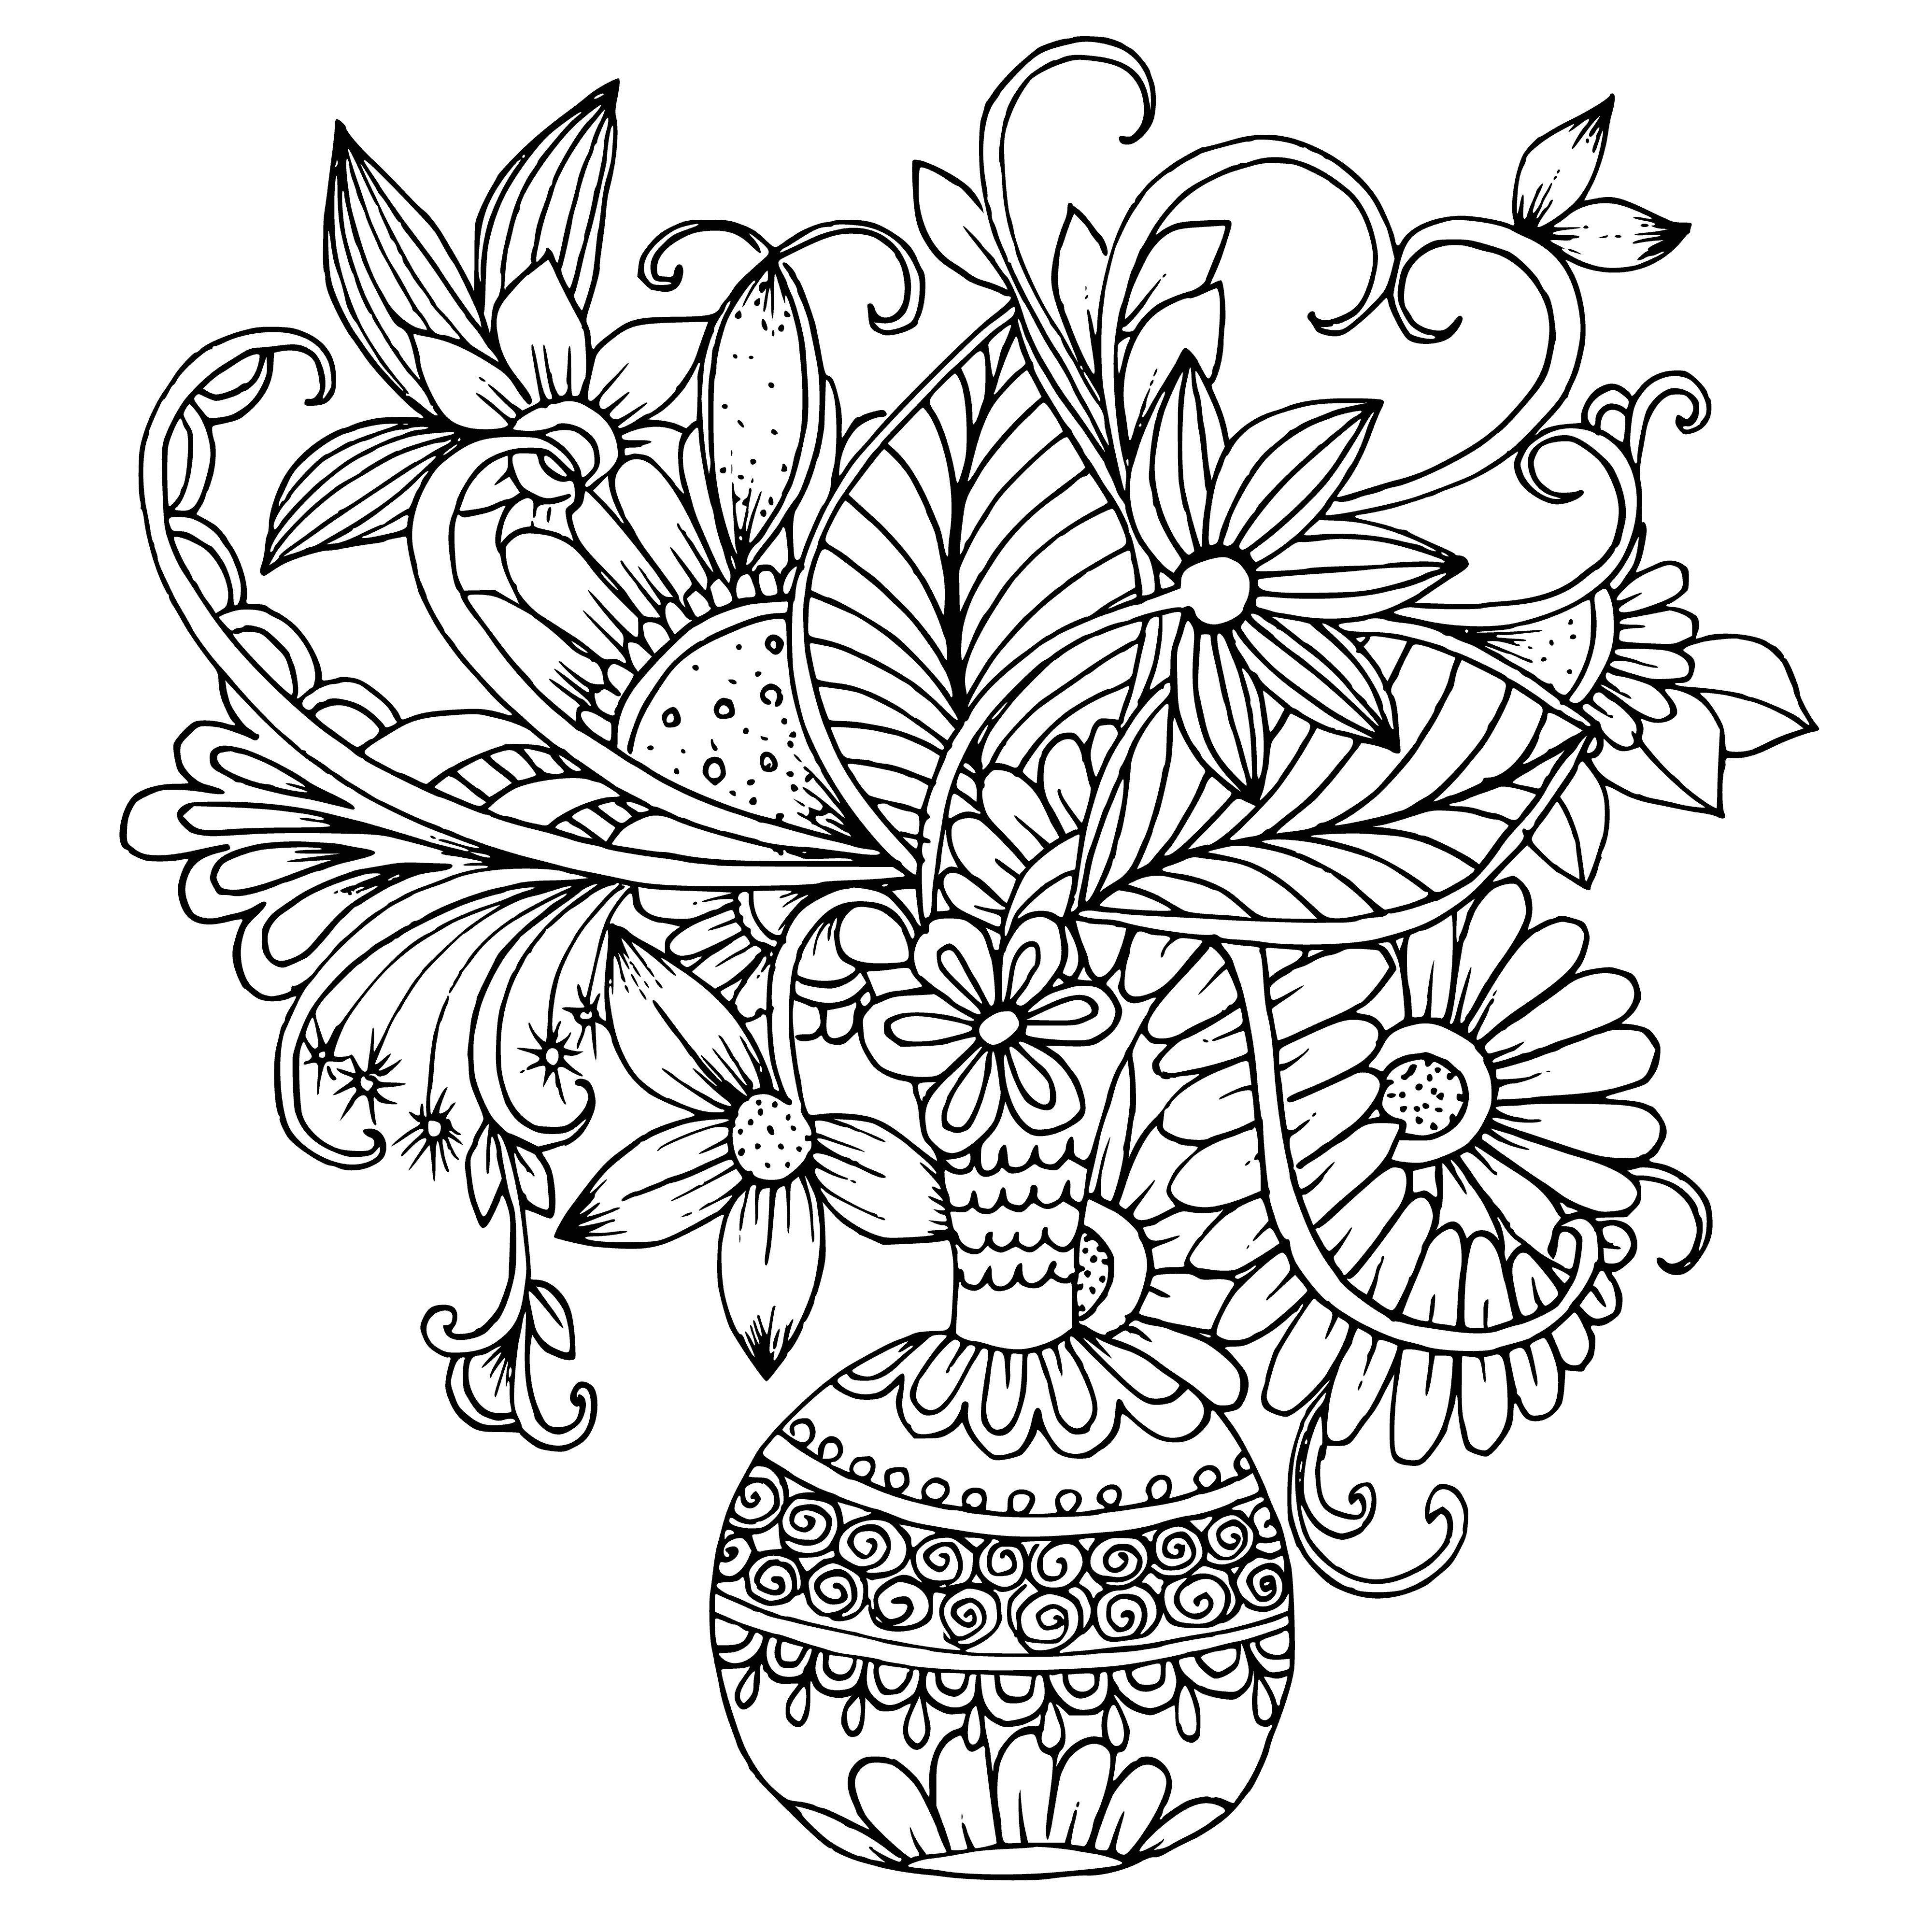 Flowers in a vase coloring page